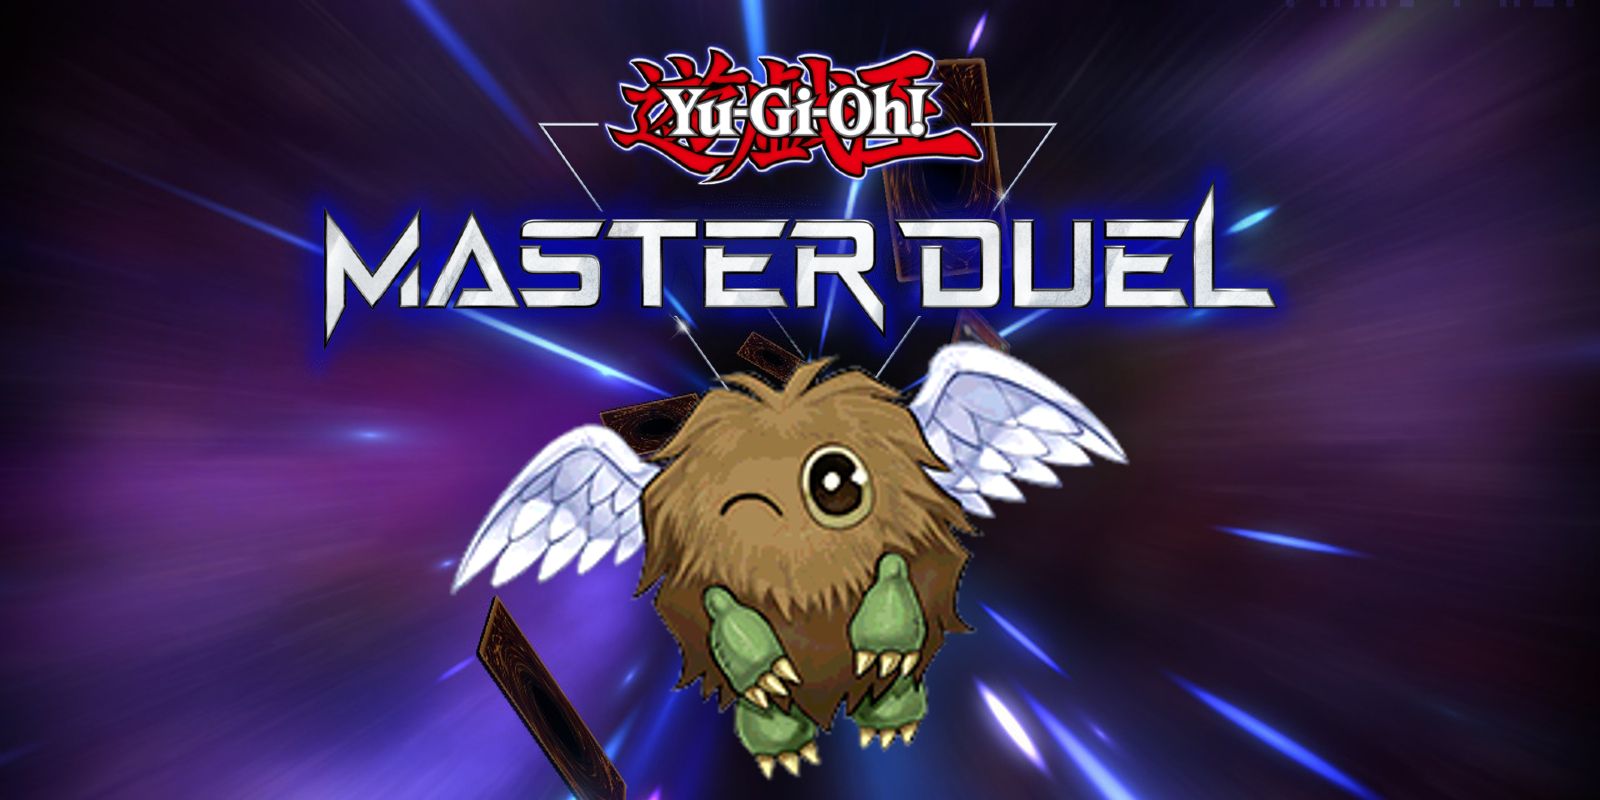 Kuriboh is one of Yu-Gi-Oh! Master Duel's most iconic monsters.